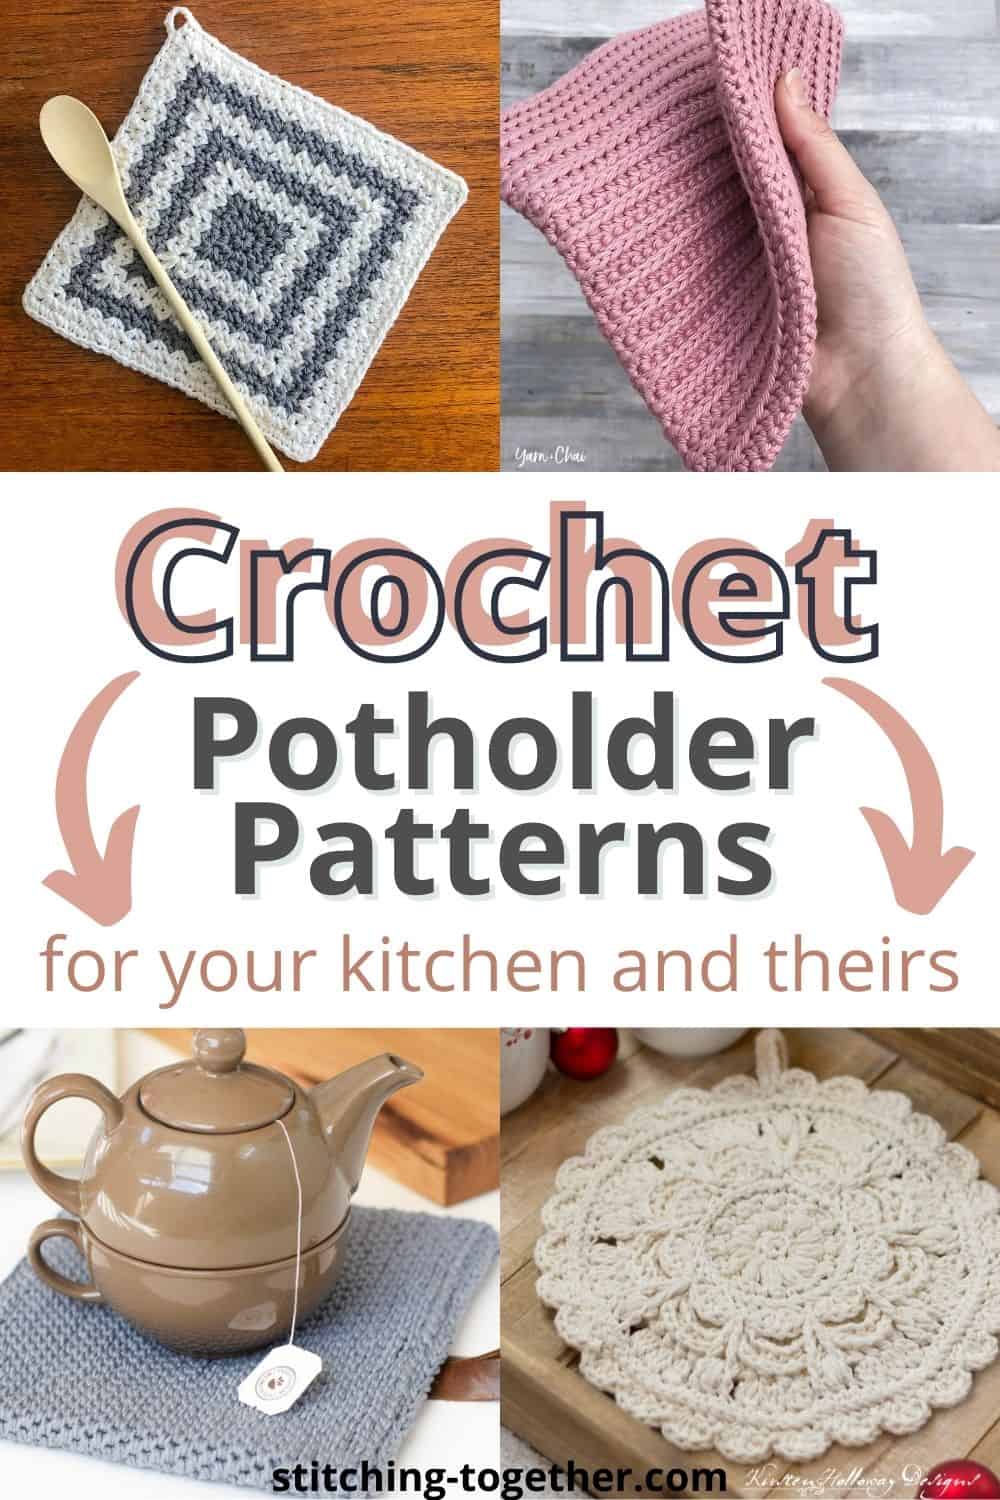 graphic with collage of potholders and text "crochet potholder patterns for your kitchen and theirs"